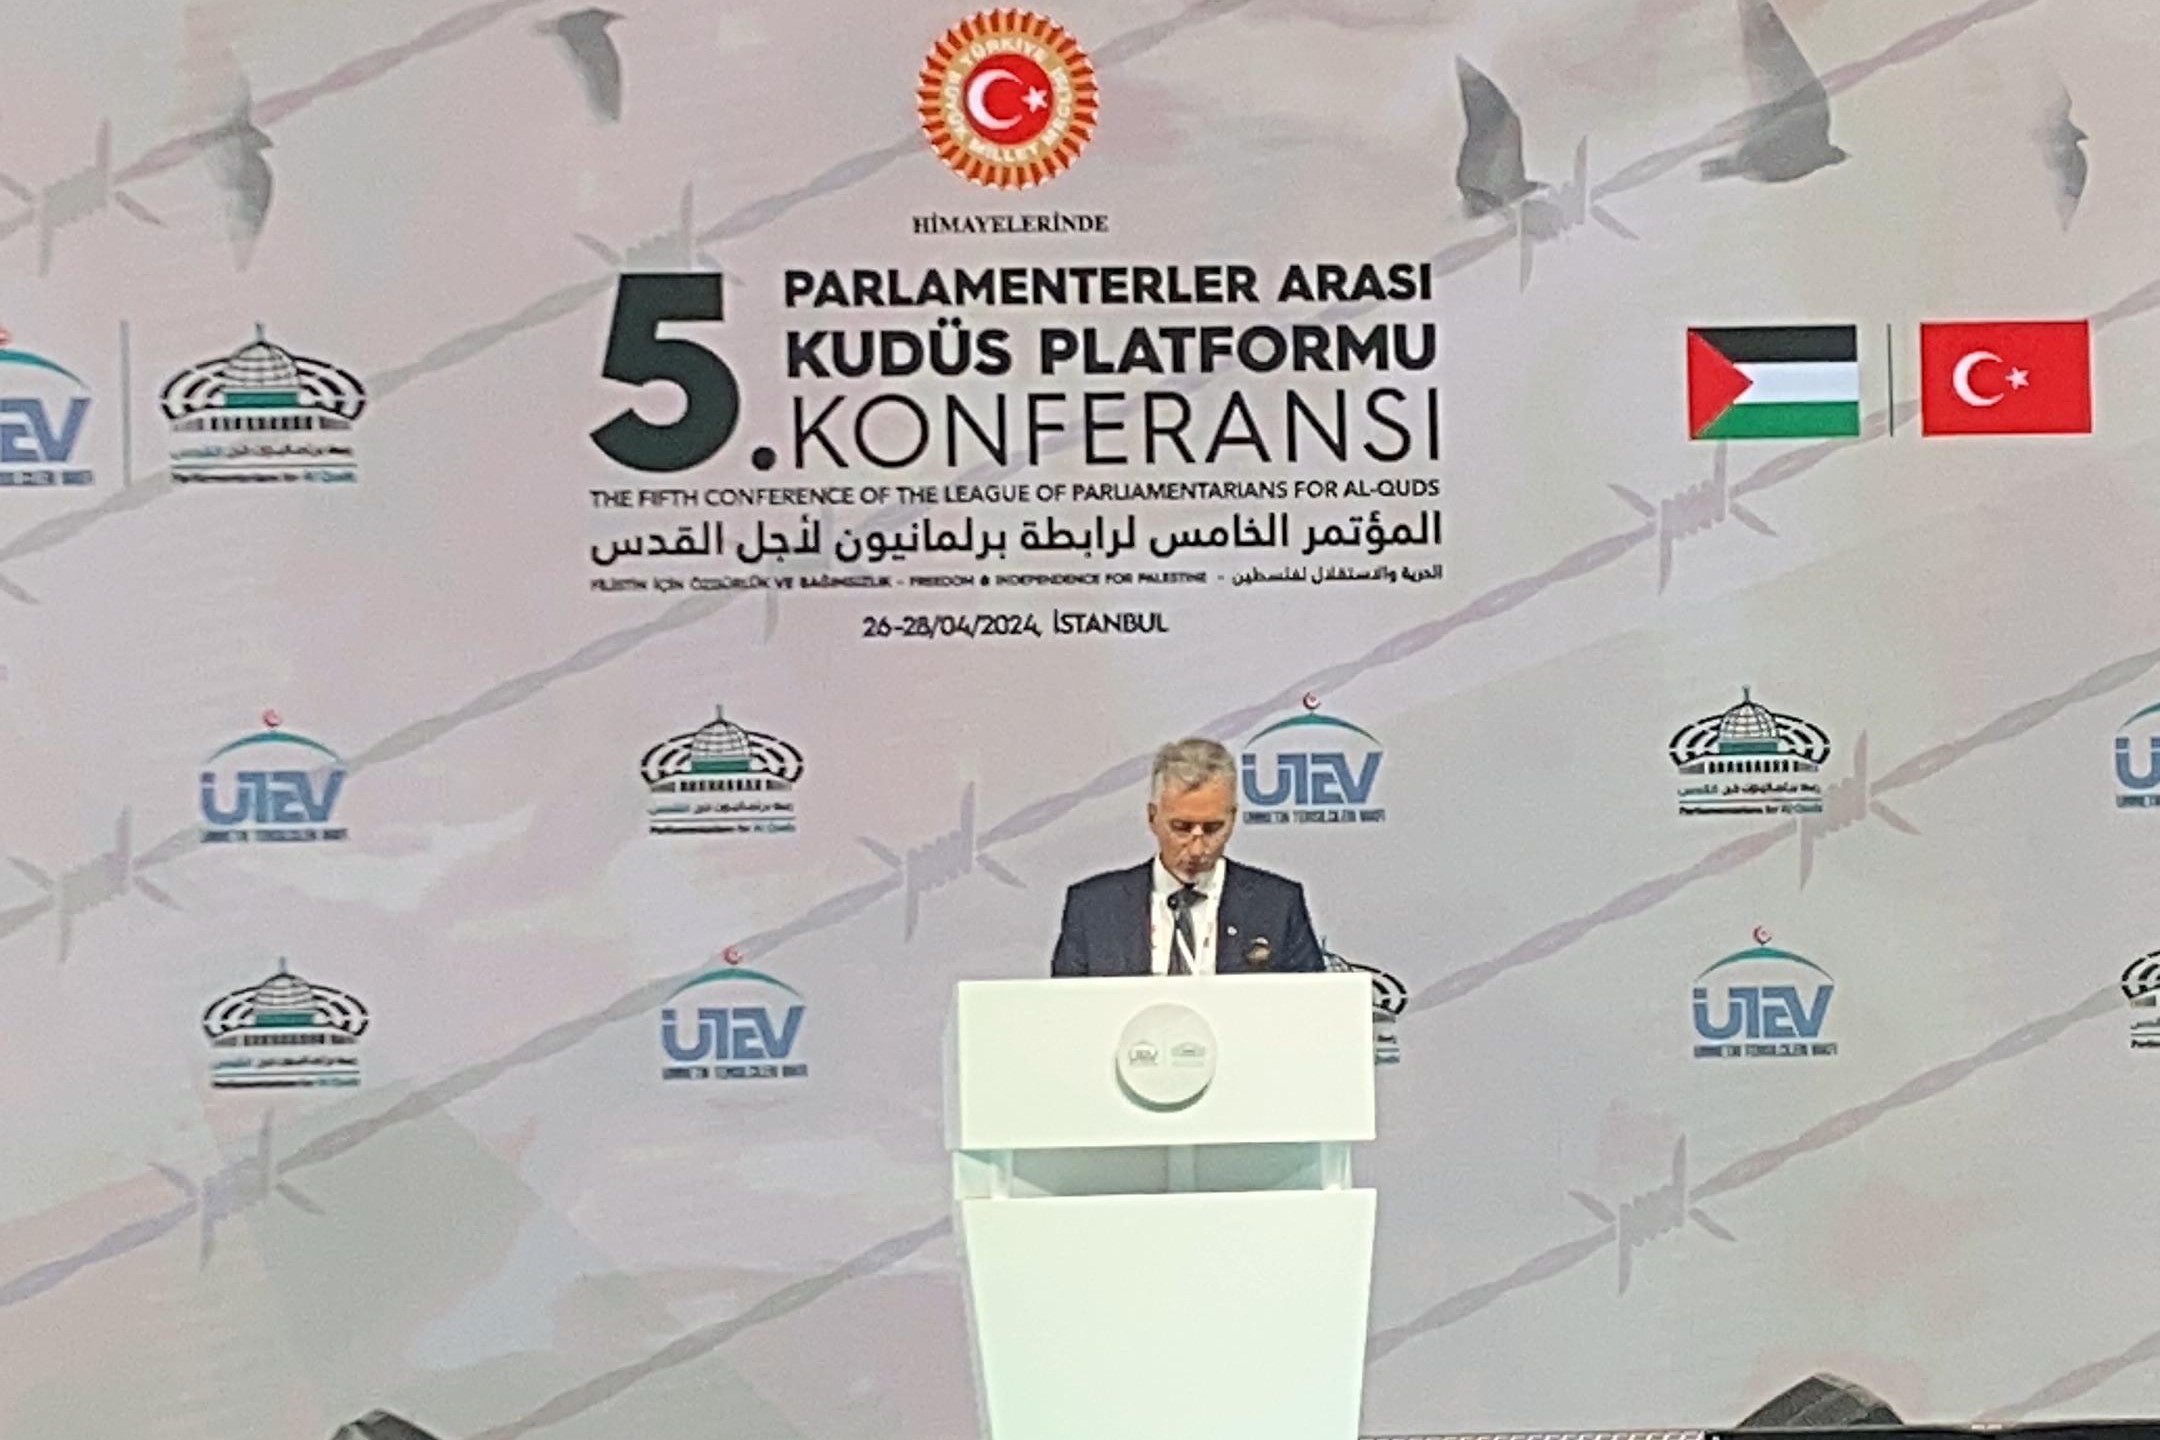 Speaker of the House of Peoples, Kemal Ademović, addressed the participants of the Fifth Conference of the League of Parliamentarians for Al-Quds in Istanbul